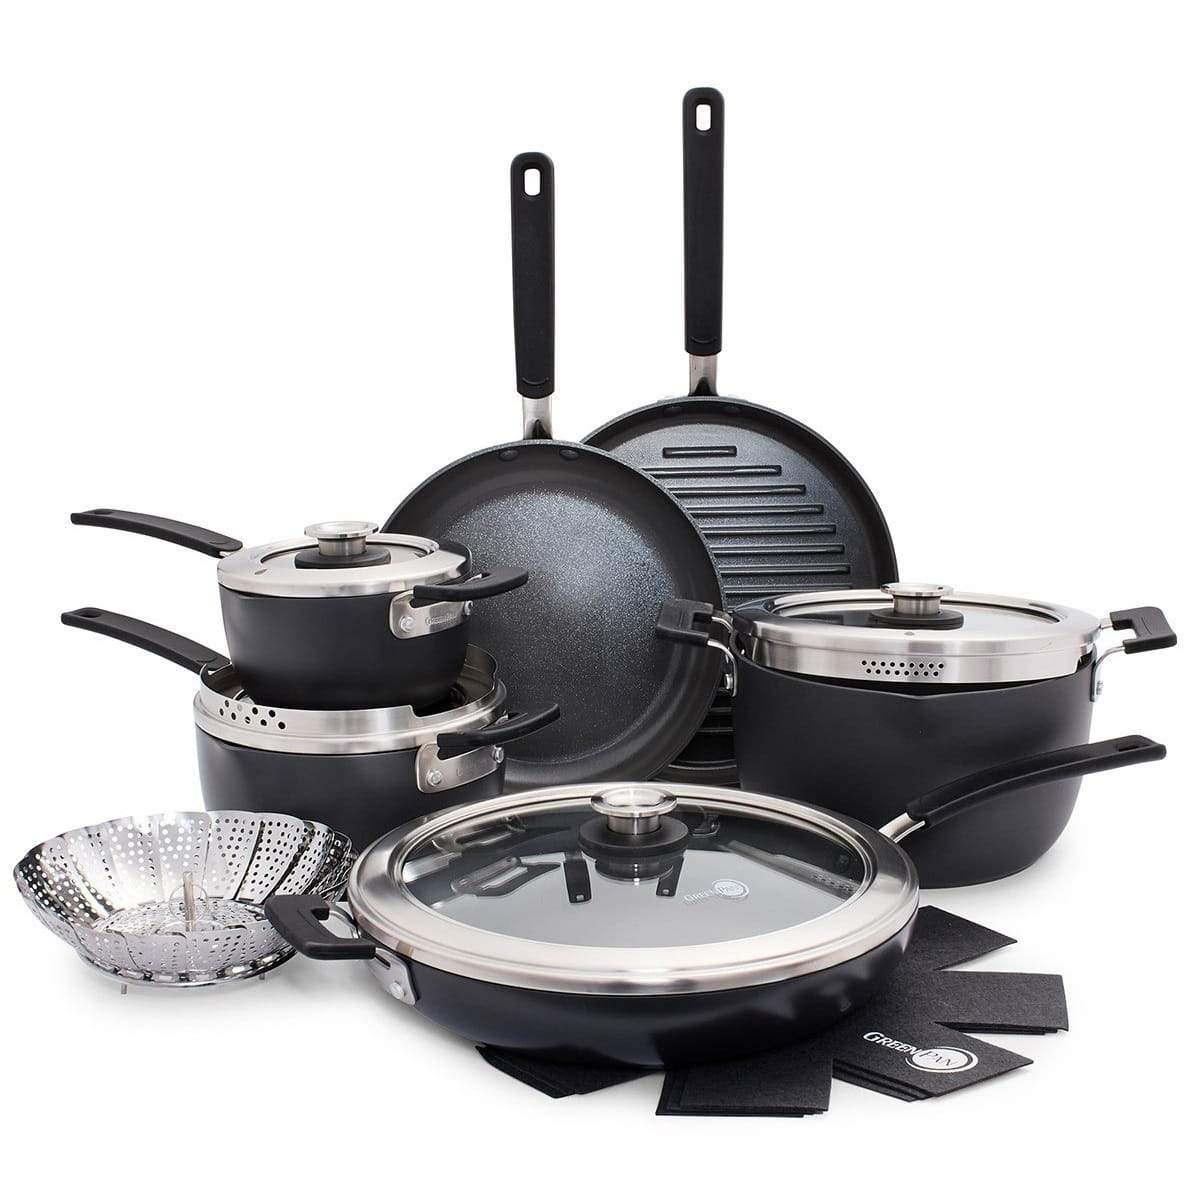 CC002120-001 - Levels 14pc Cookware Sets, Dark Grey - Product Image 1